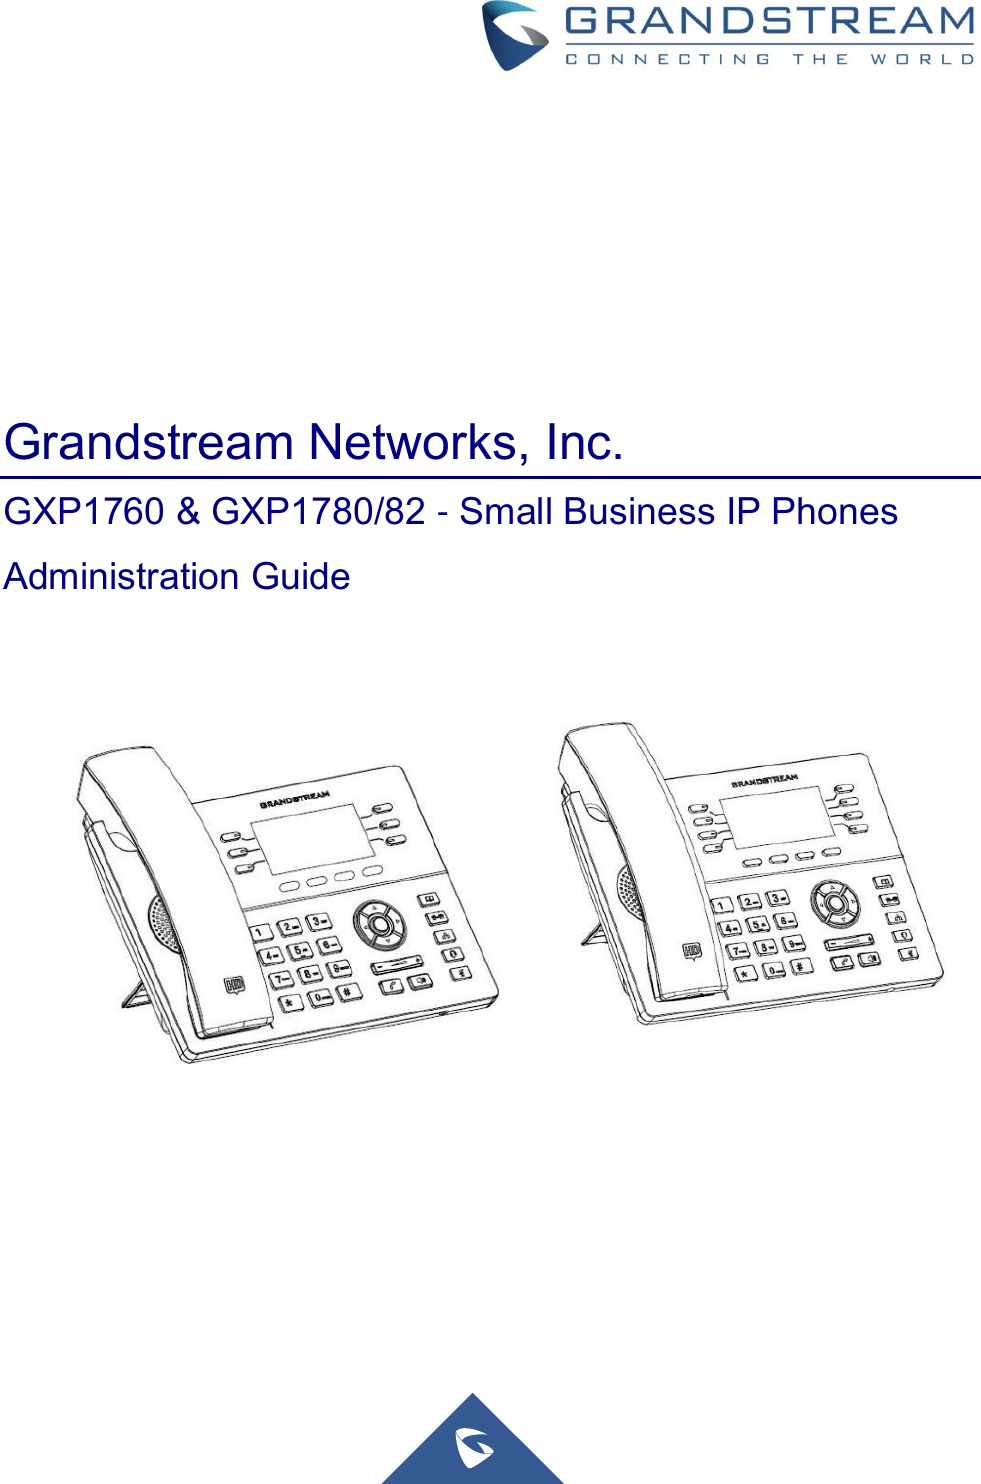                                                Grandstream Networks, Inc. GXP1760 &amp; GXP1780/82 - Small Business IP Phones Administration Guide         